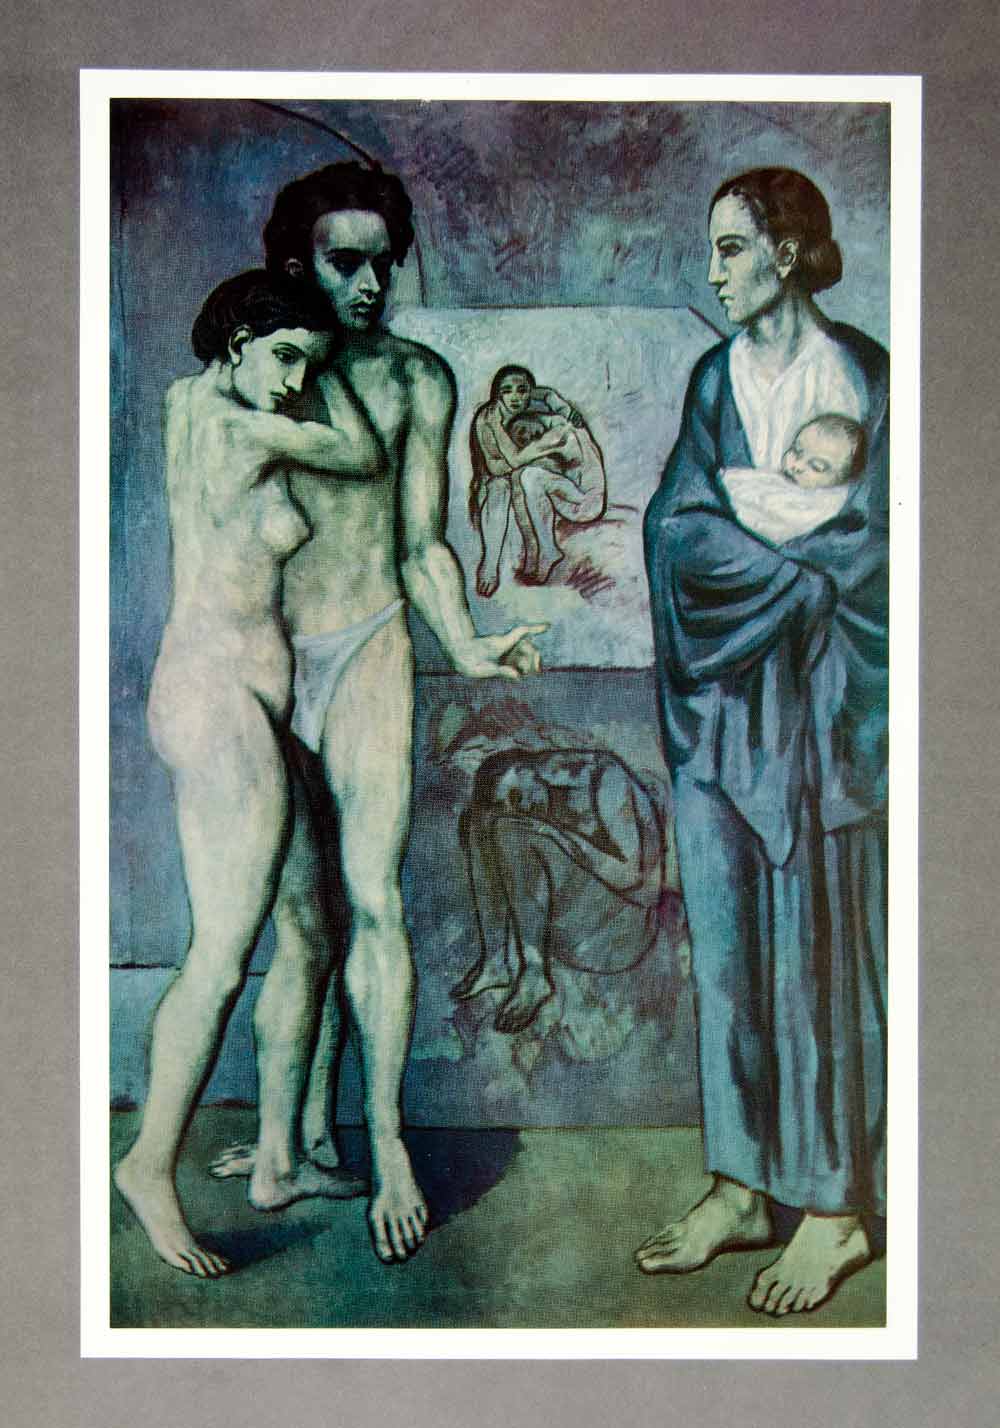 1971 Print Baby Mother Nude Lovers La Vie Pablo Picasso Blue Period Paint XALA9